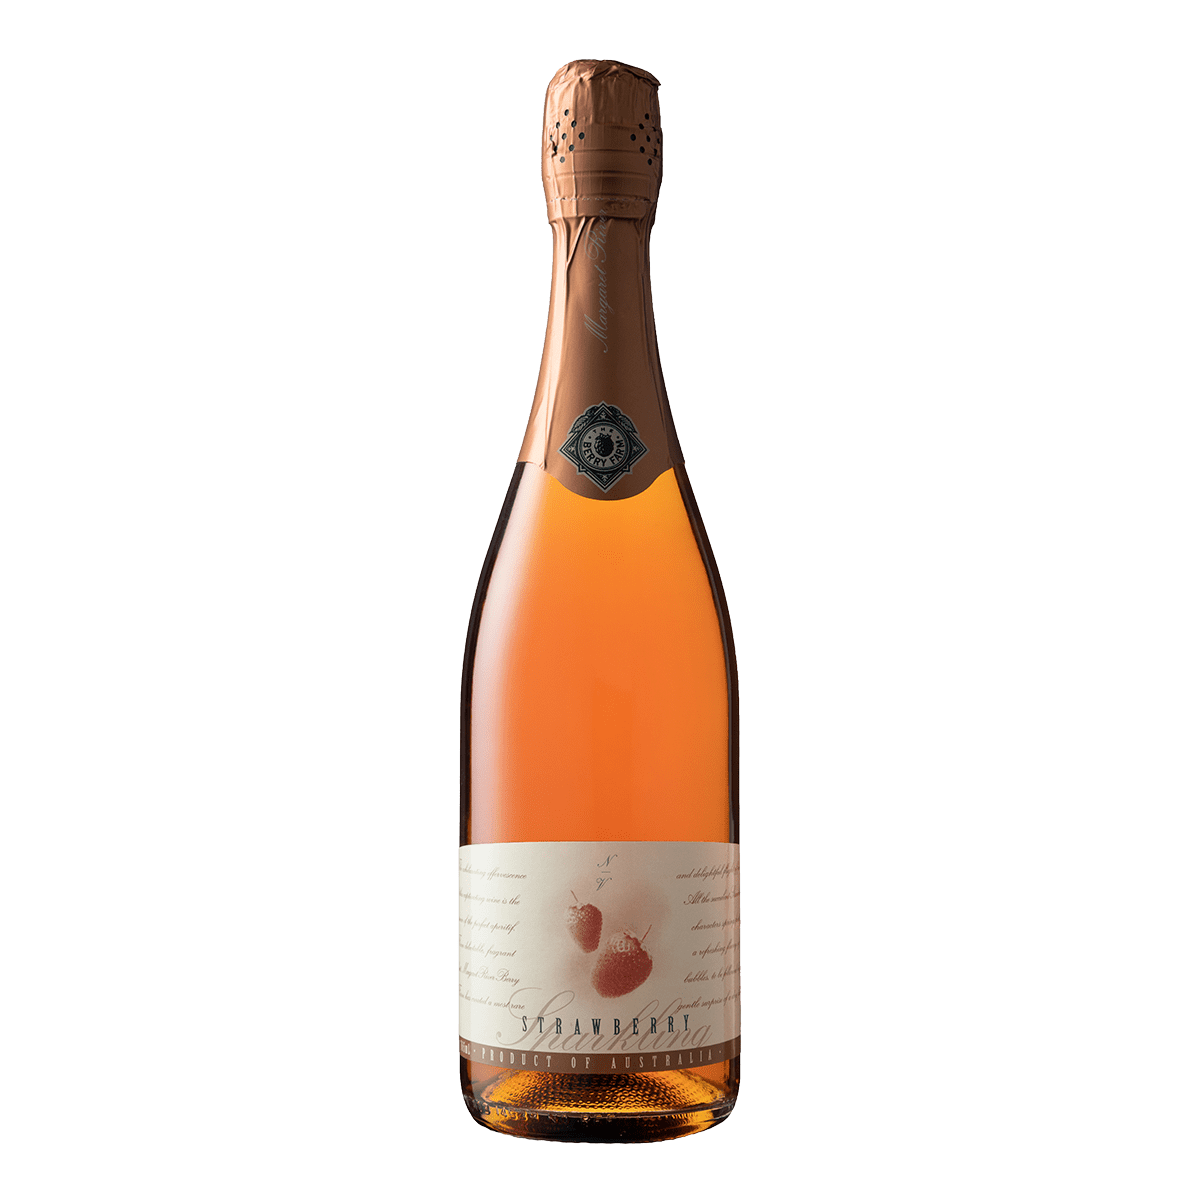 A bottle of Strawberry Sparkling Wine